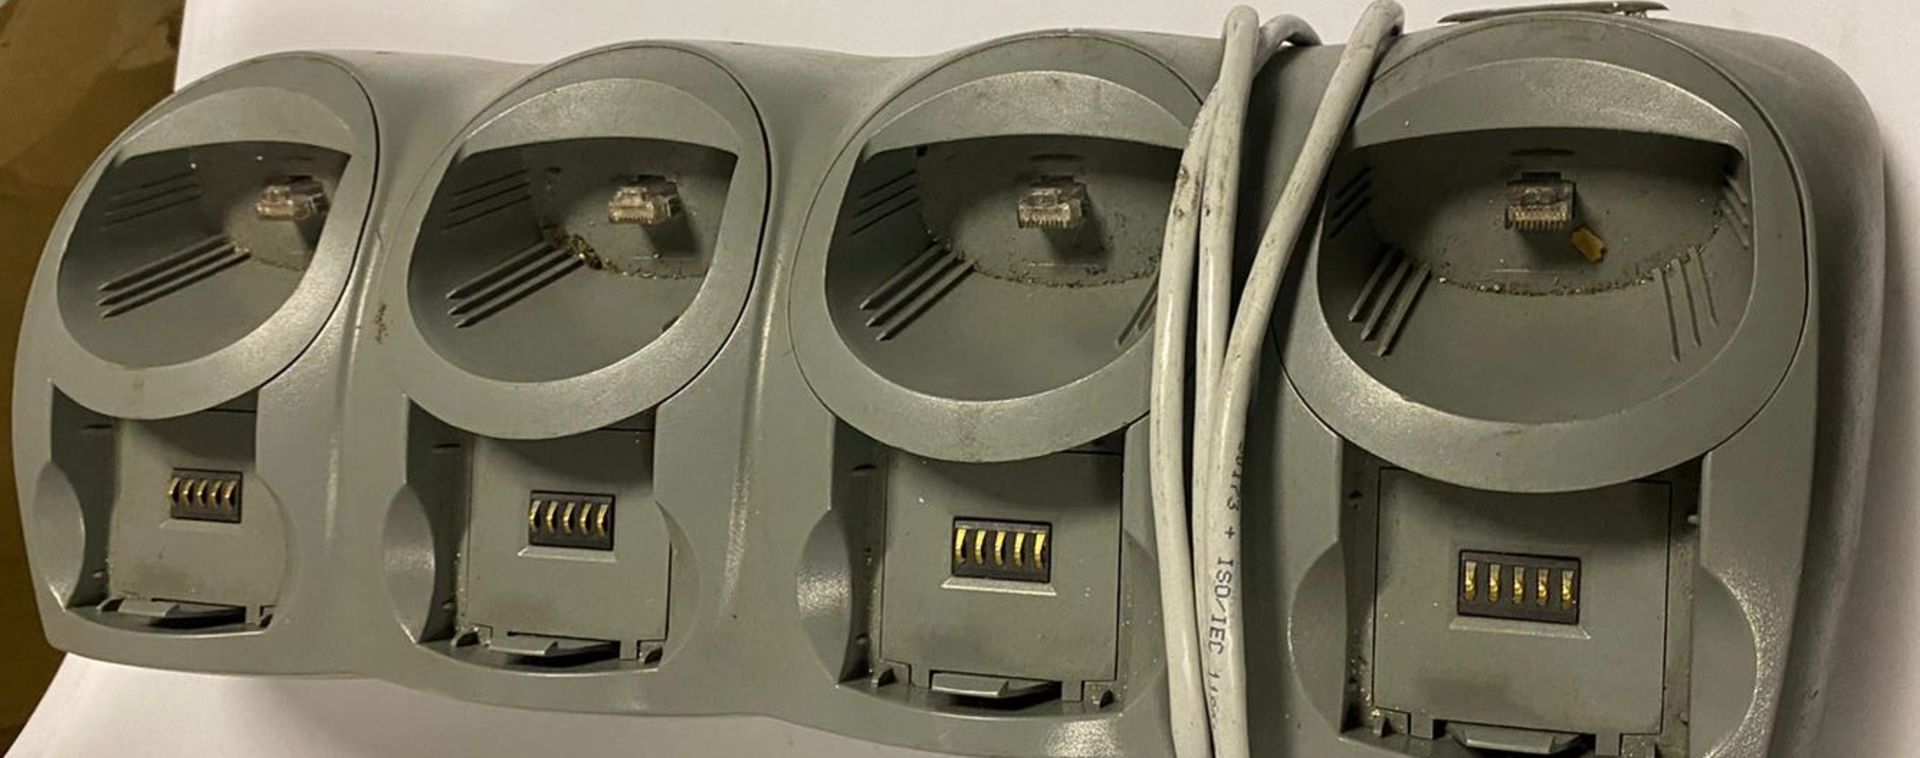 3 x Symbol CRD 6100-4030-000 Quad Slot Cardle Charger - Used Condition - Location: Altrincham WA14 - - Image 3 of 7